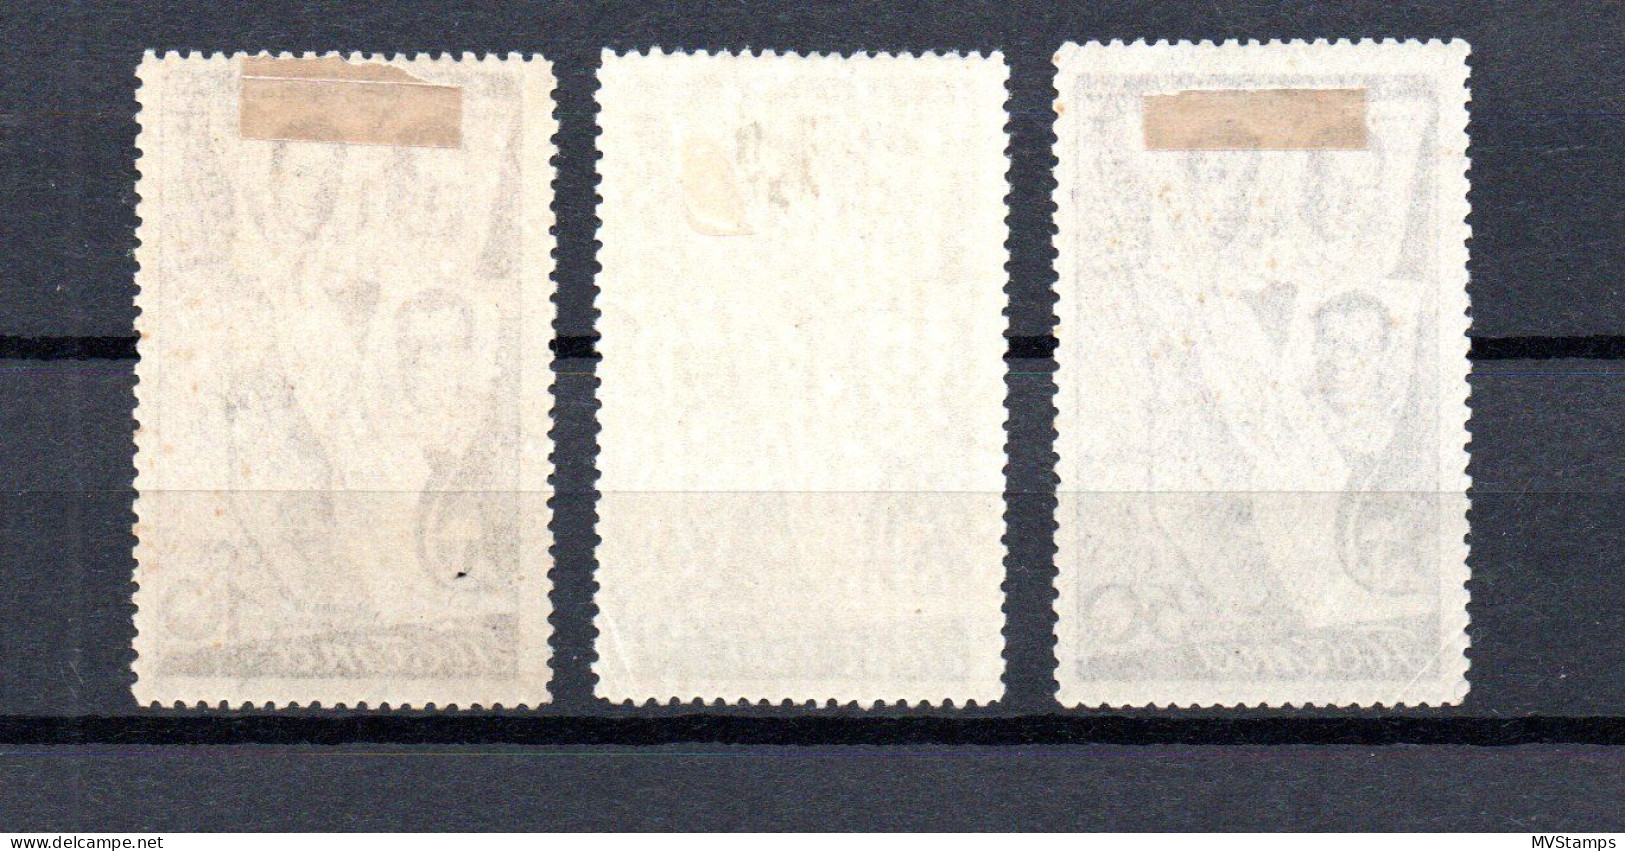 Russia 1938 Old Set Polar-Flight Moscow-San Jacinto Stamps (Michel 599/601) MLH - Nuovi